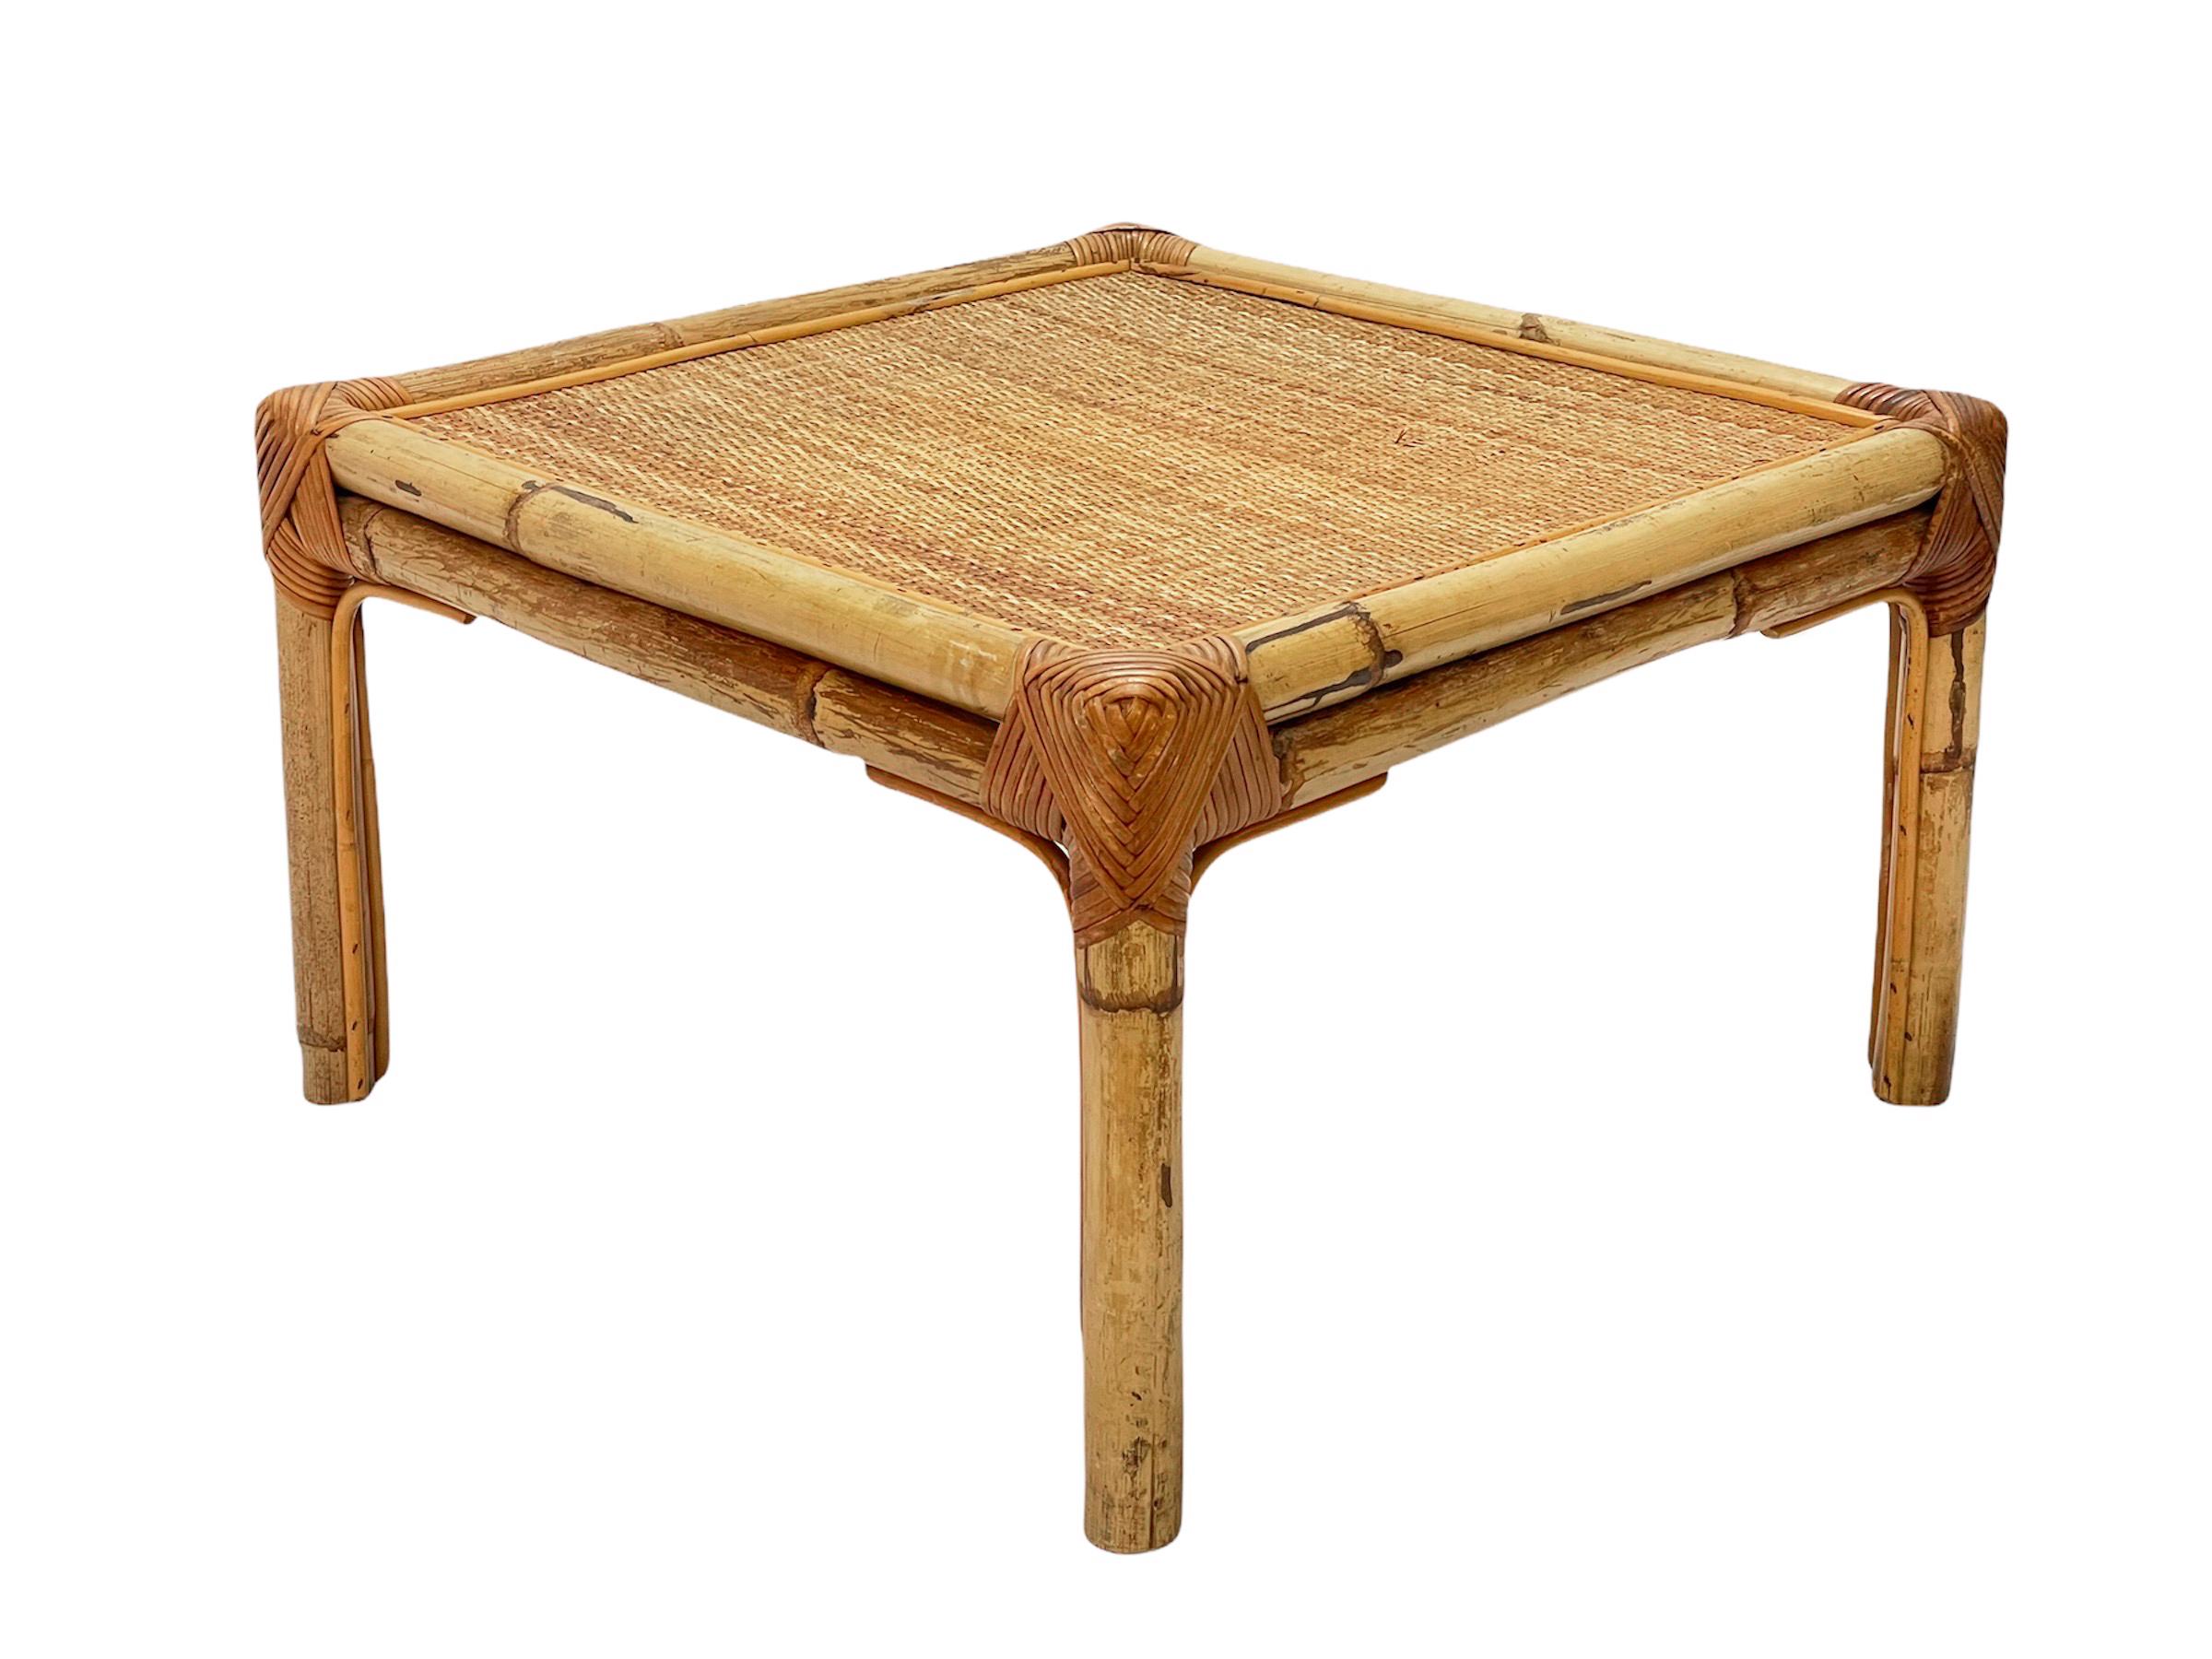 Vivai del Sud Midcentury Italian Squared Bamboo and Rattan Coffee Table, 1970 For Sale 9